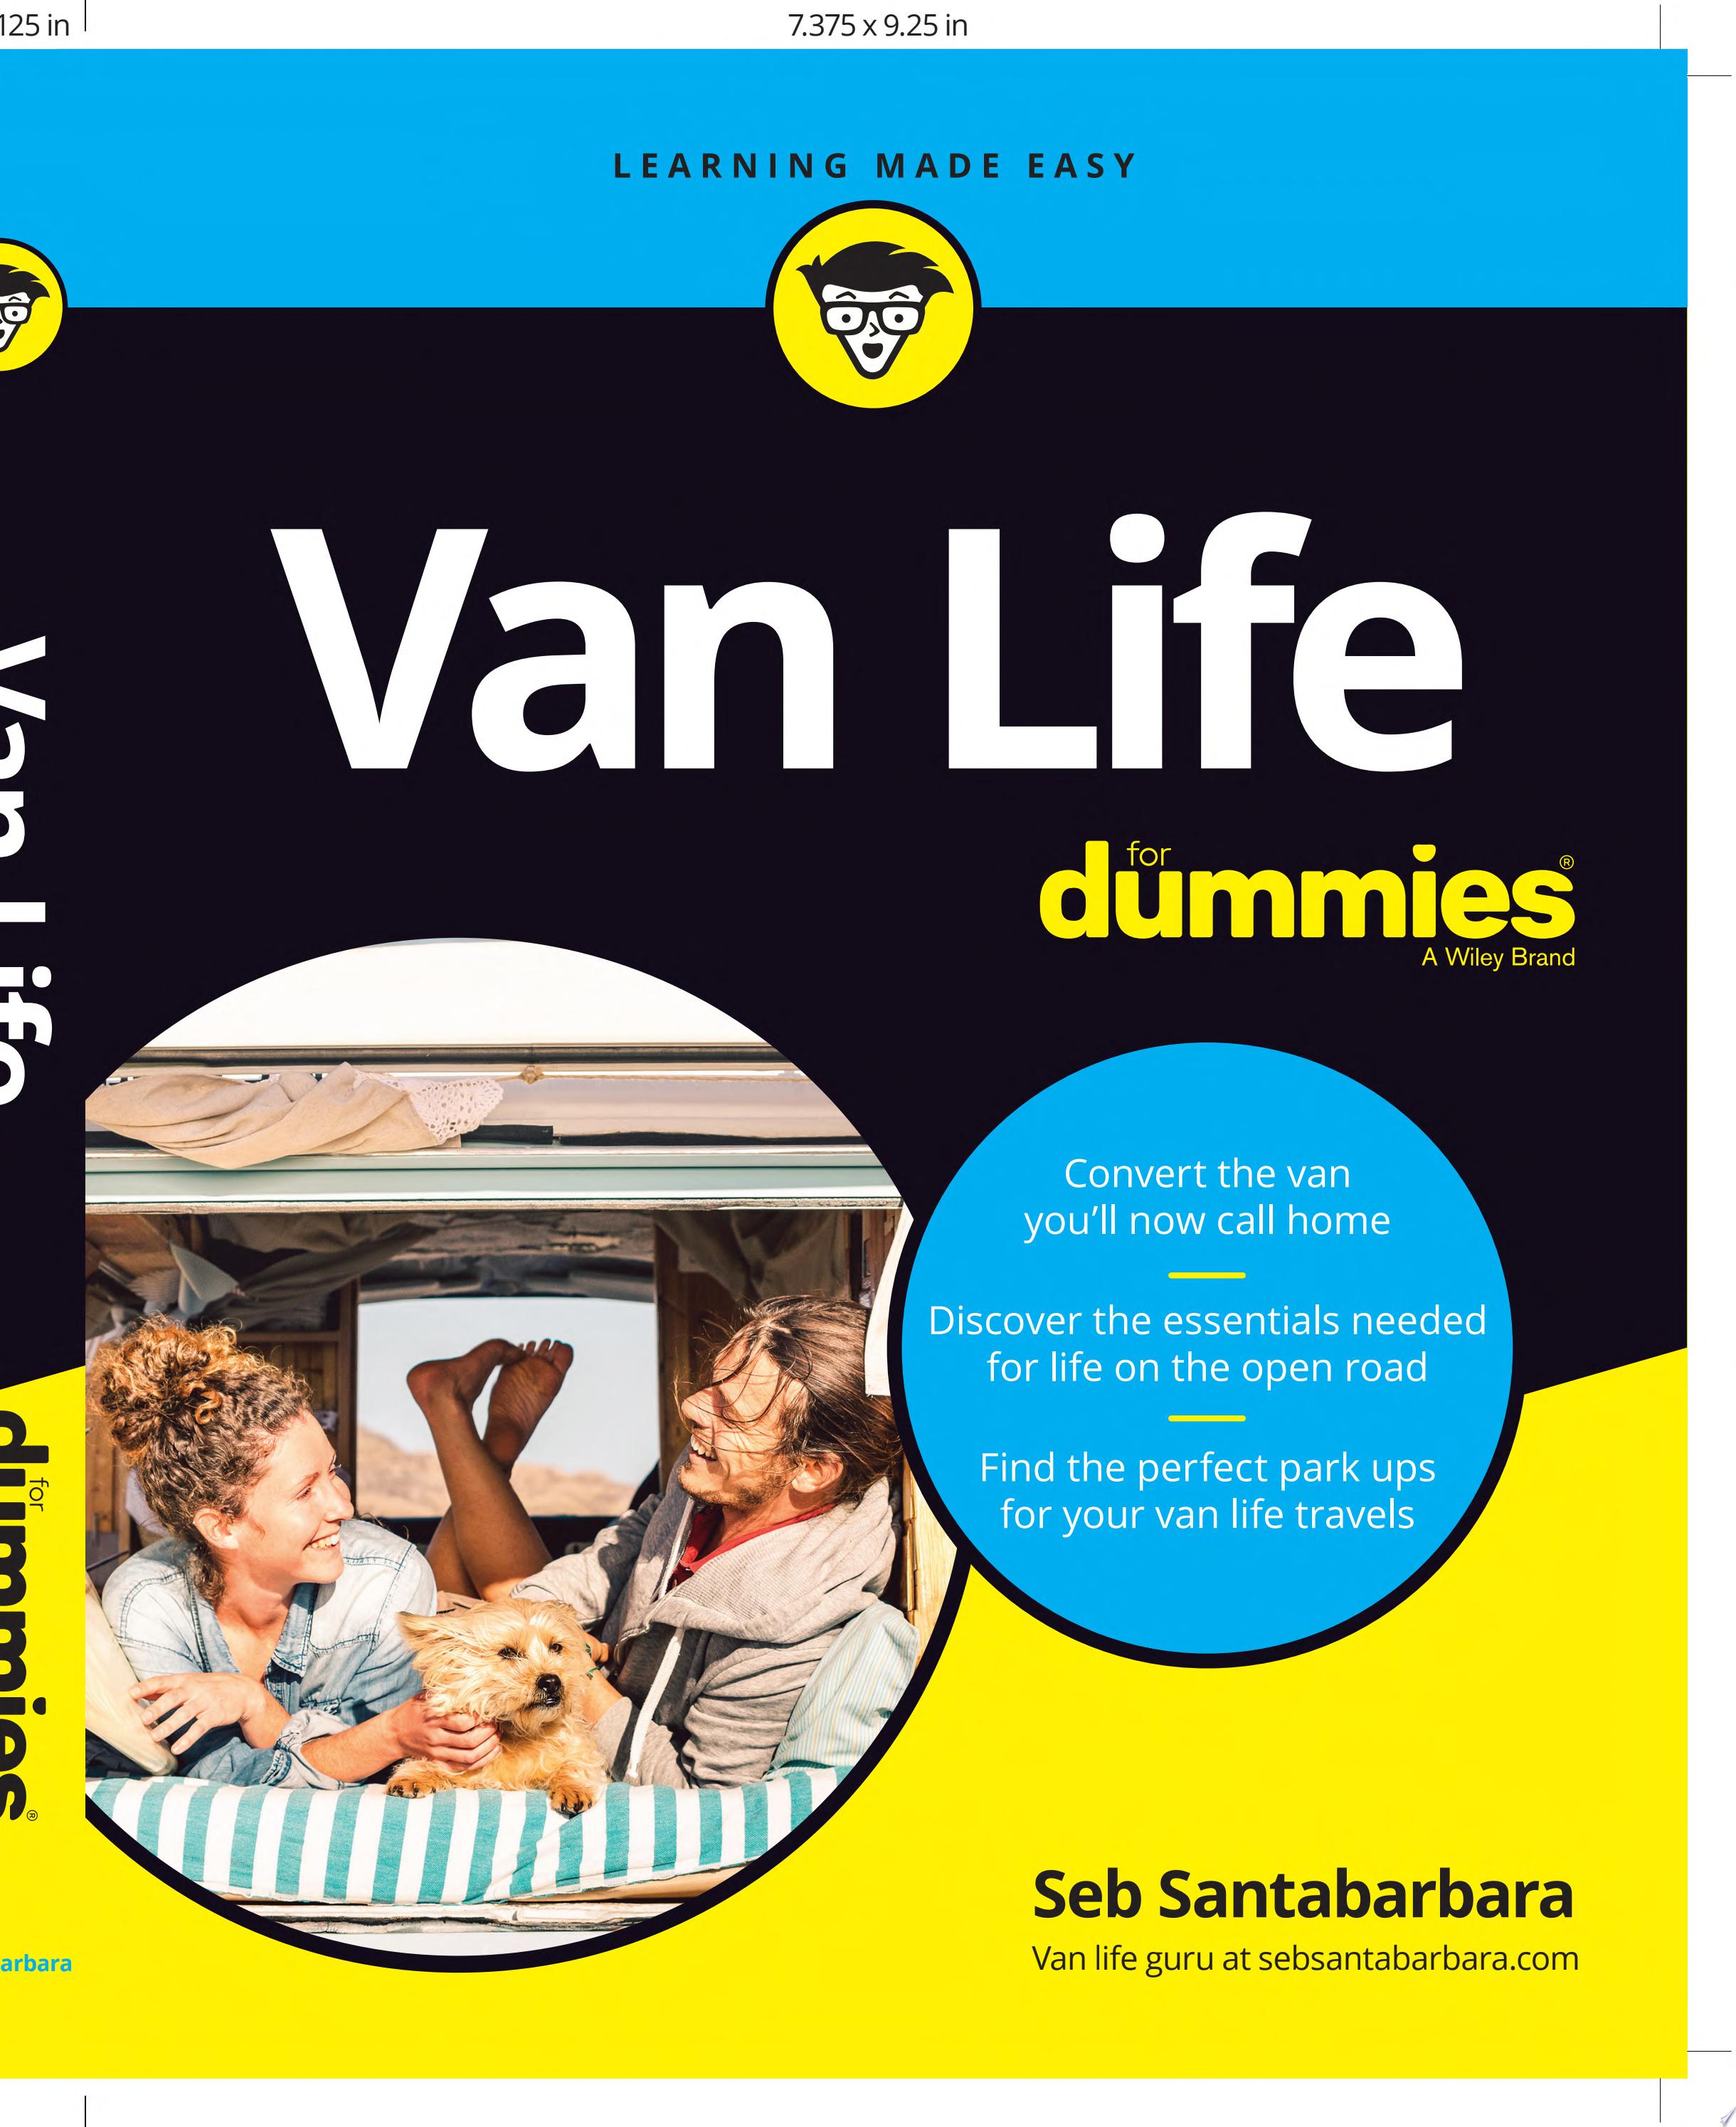 Image for "Van Life For Dummies"